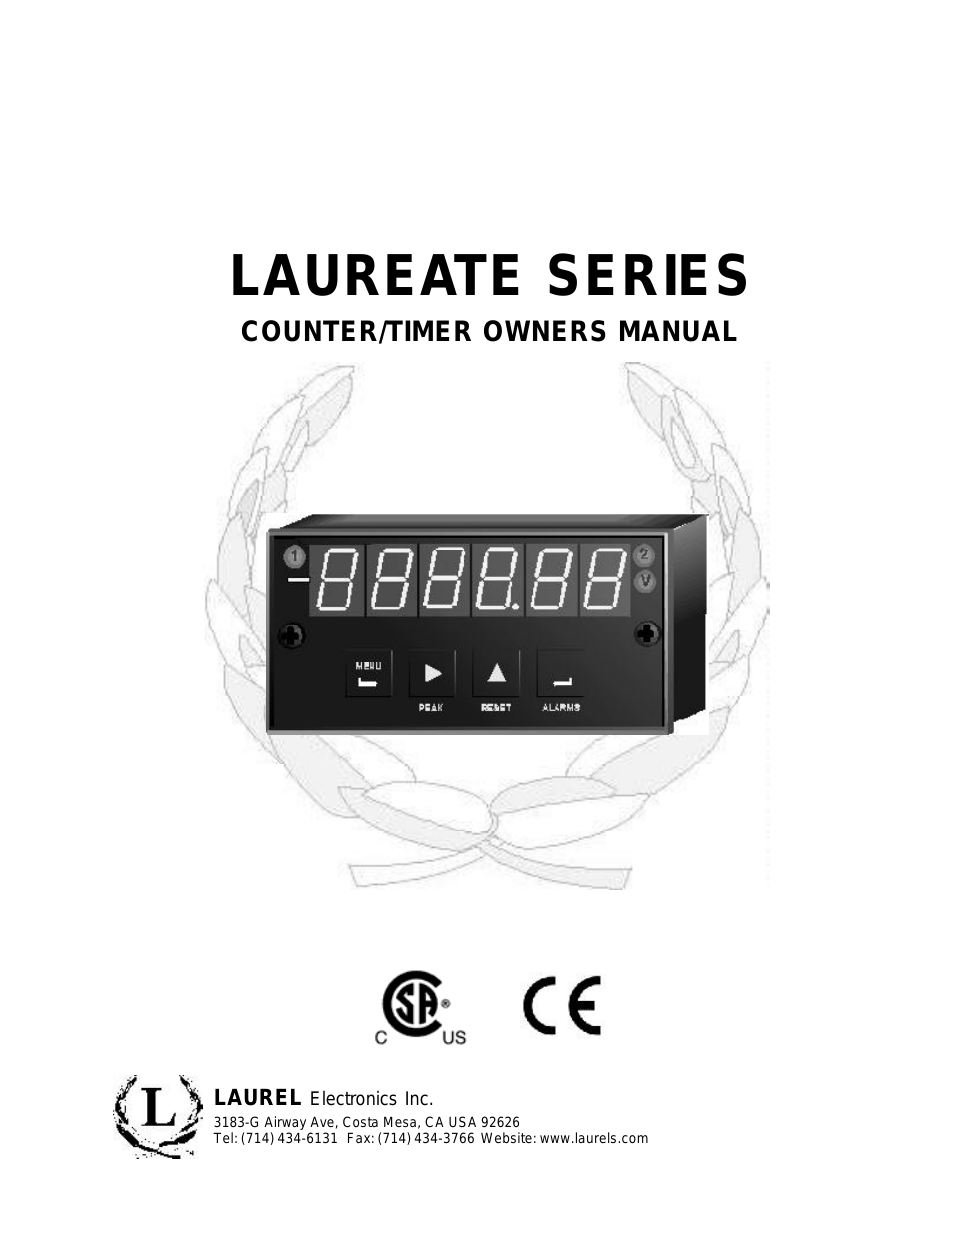 LAUREATE SERIES COUNTER_TIMER